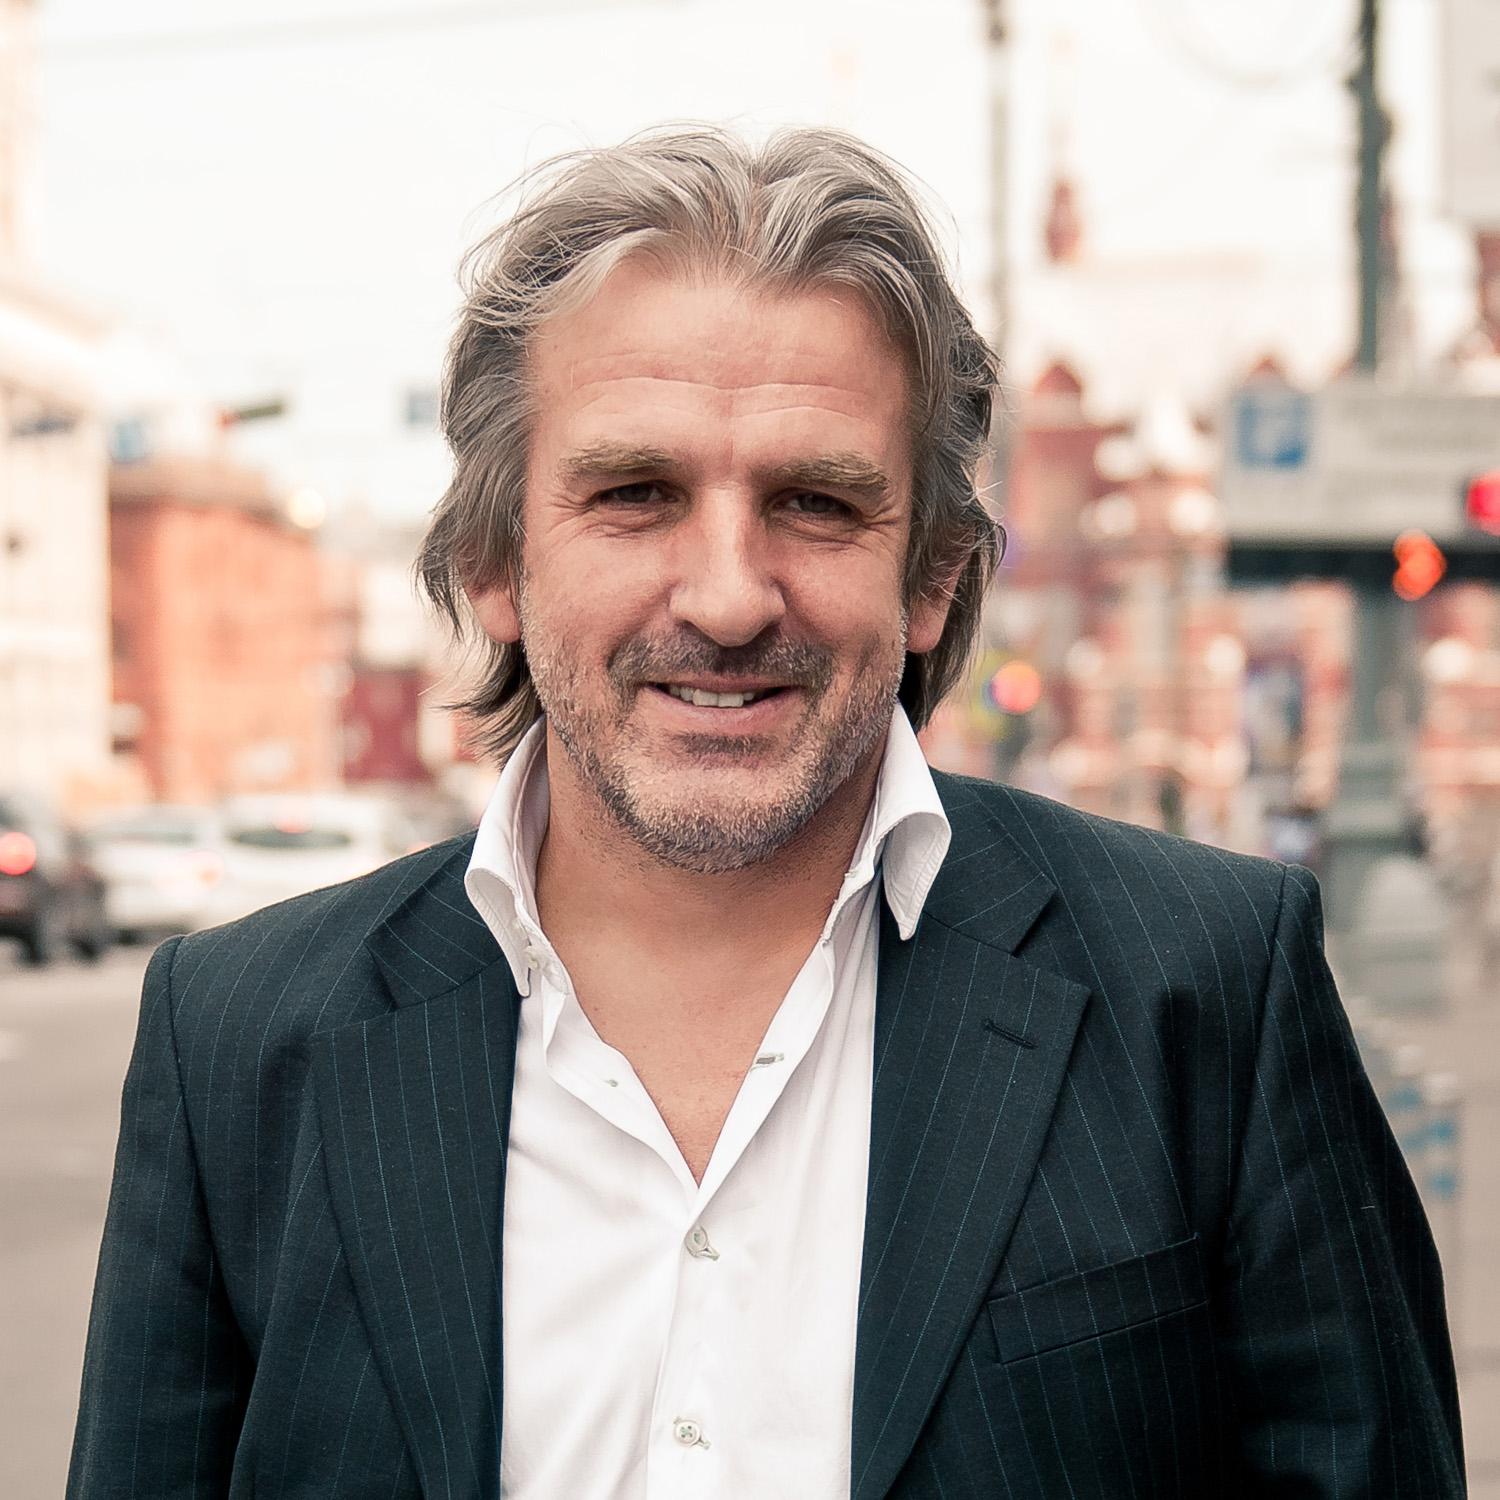 Barry Douglas in formal business wear, smiling and squinting slightly in front of a blurry street scene